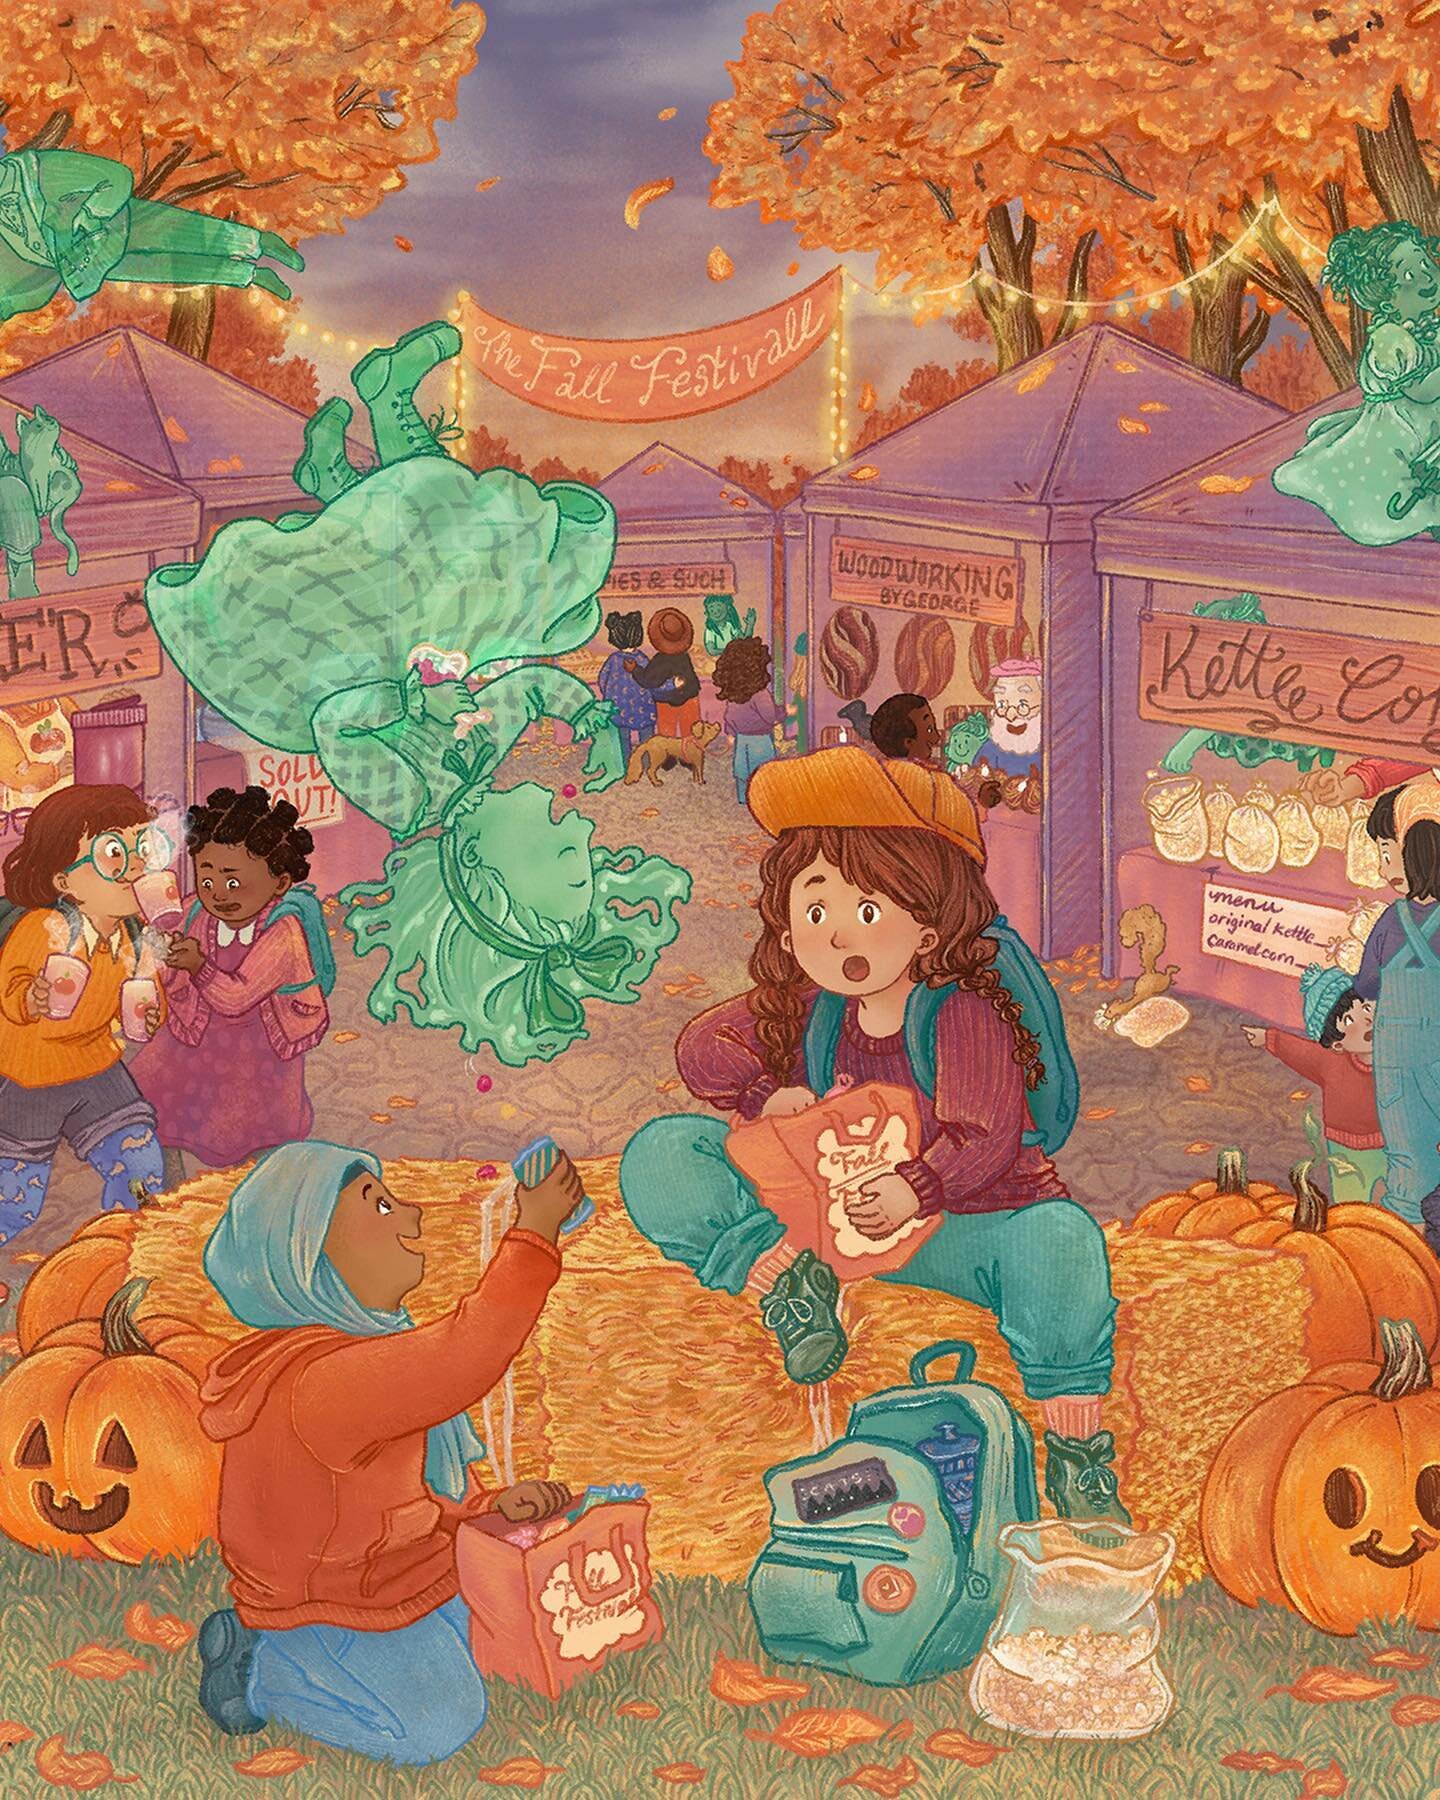 Welcome one and all to the annual Marigold City Fall Festival! 🍂&nbsp;All are welcome, admission is free, and incorporeal beings eat for free. Come on down this Saturday from 10 am - 6 pm to join in the fun! 🎃

Happy Halloween everybody! I hope you